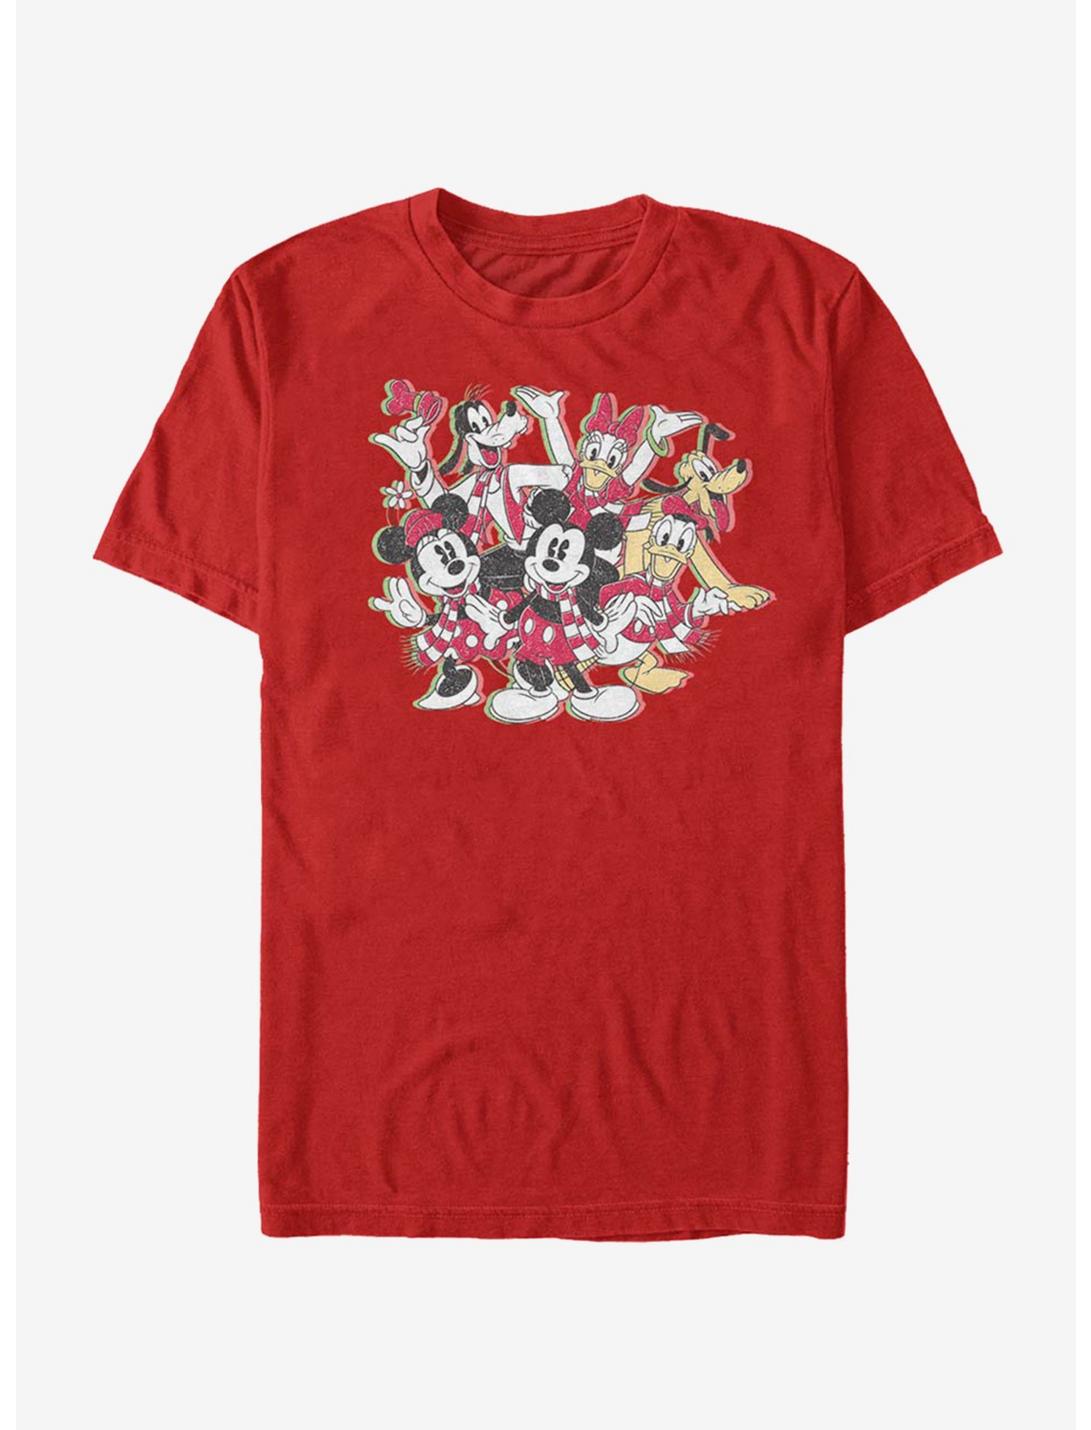 Disney Mickey Mouse Sensational Holiday T-Shirt, RED, hi-res